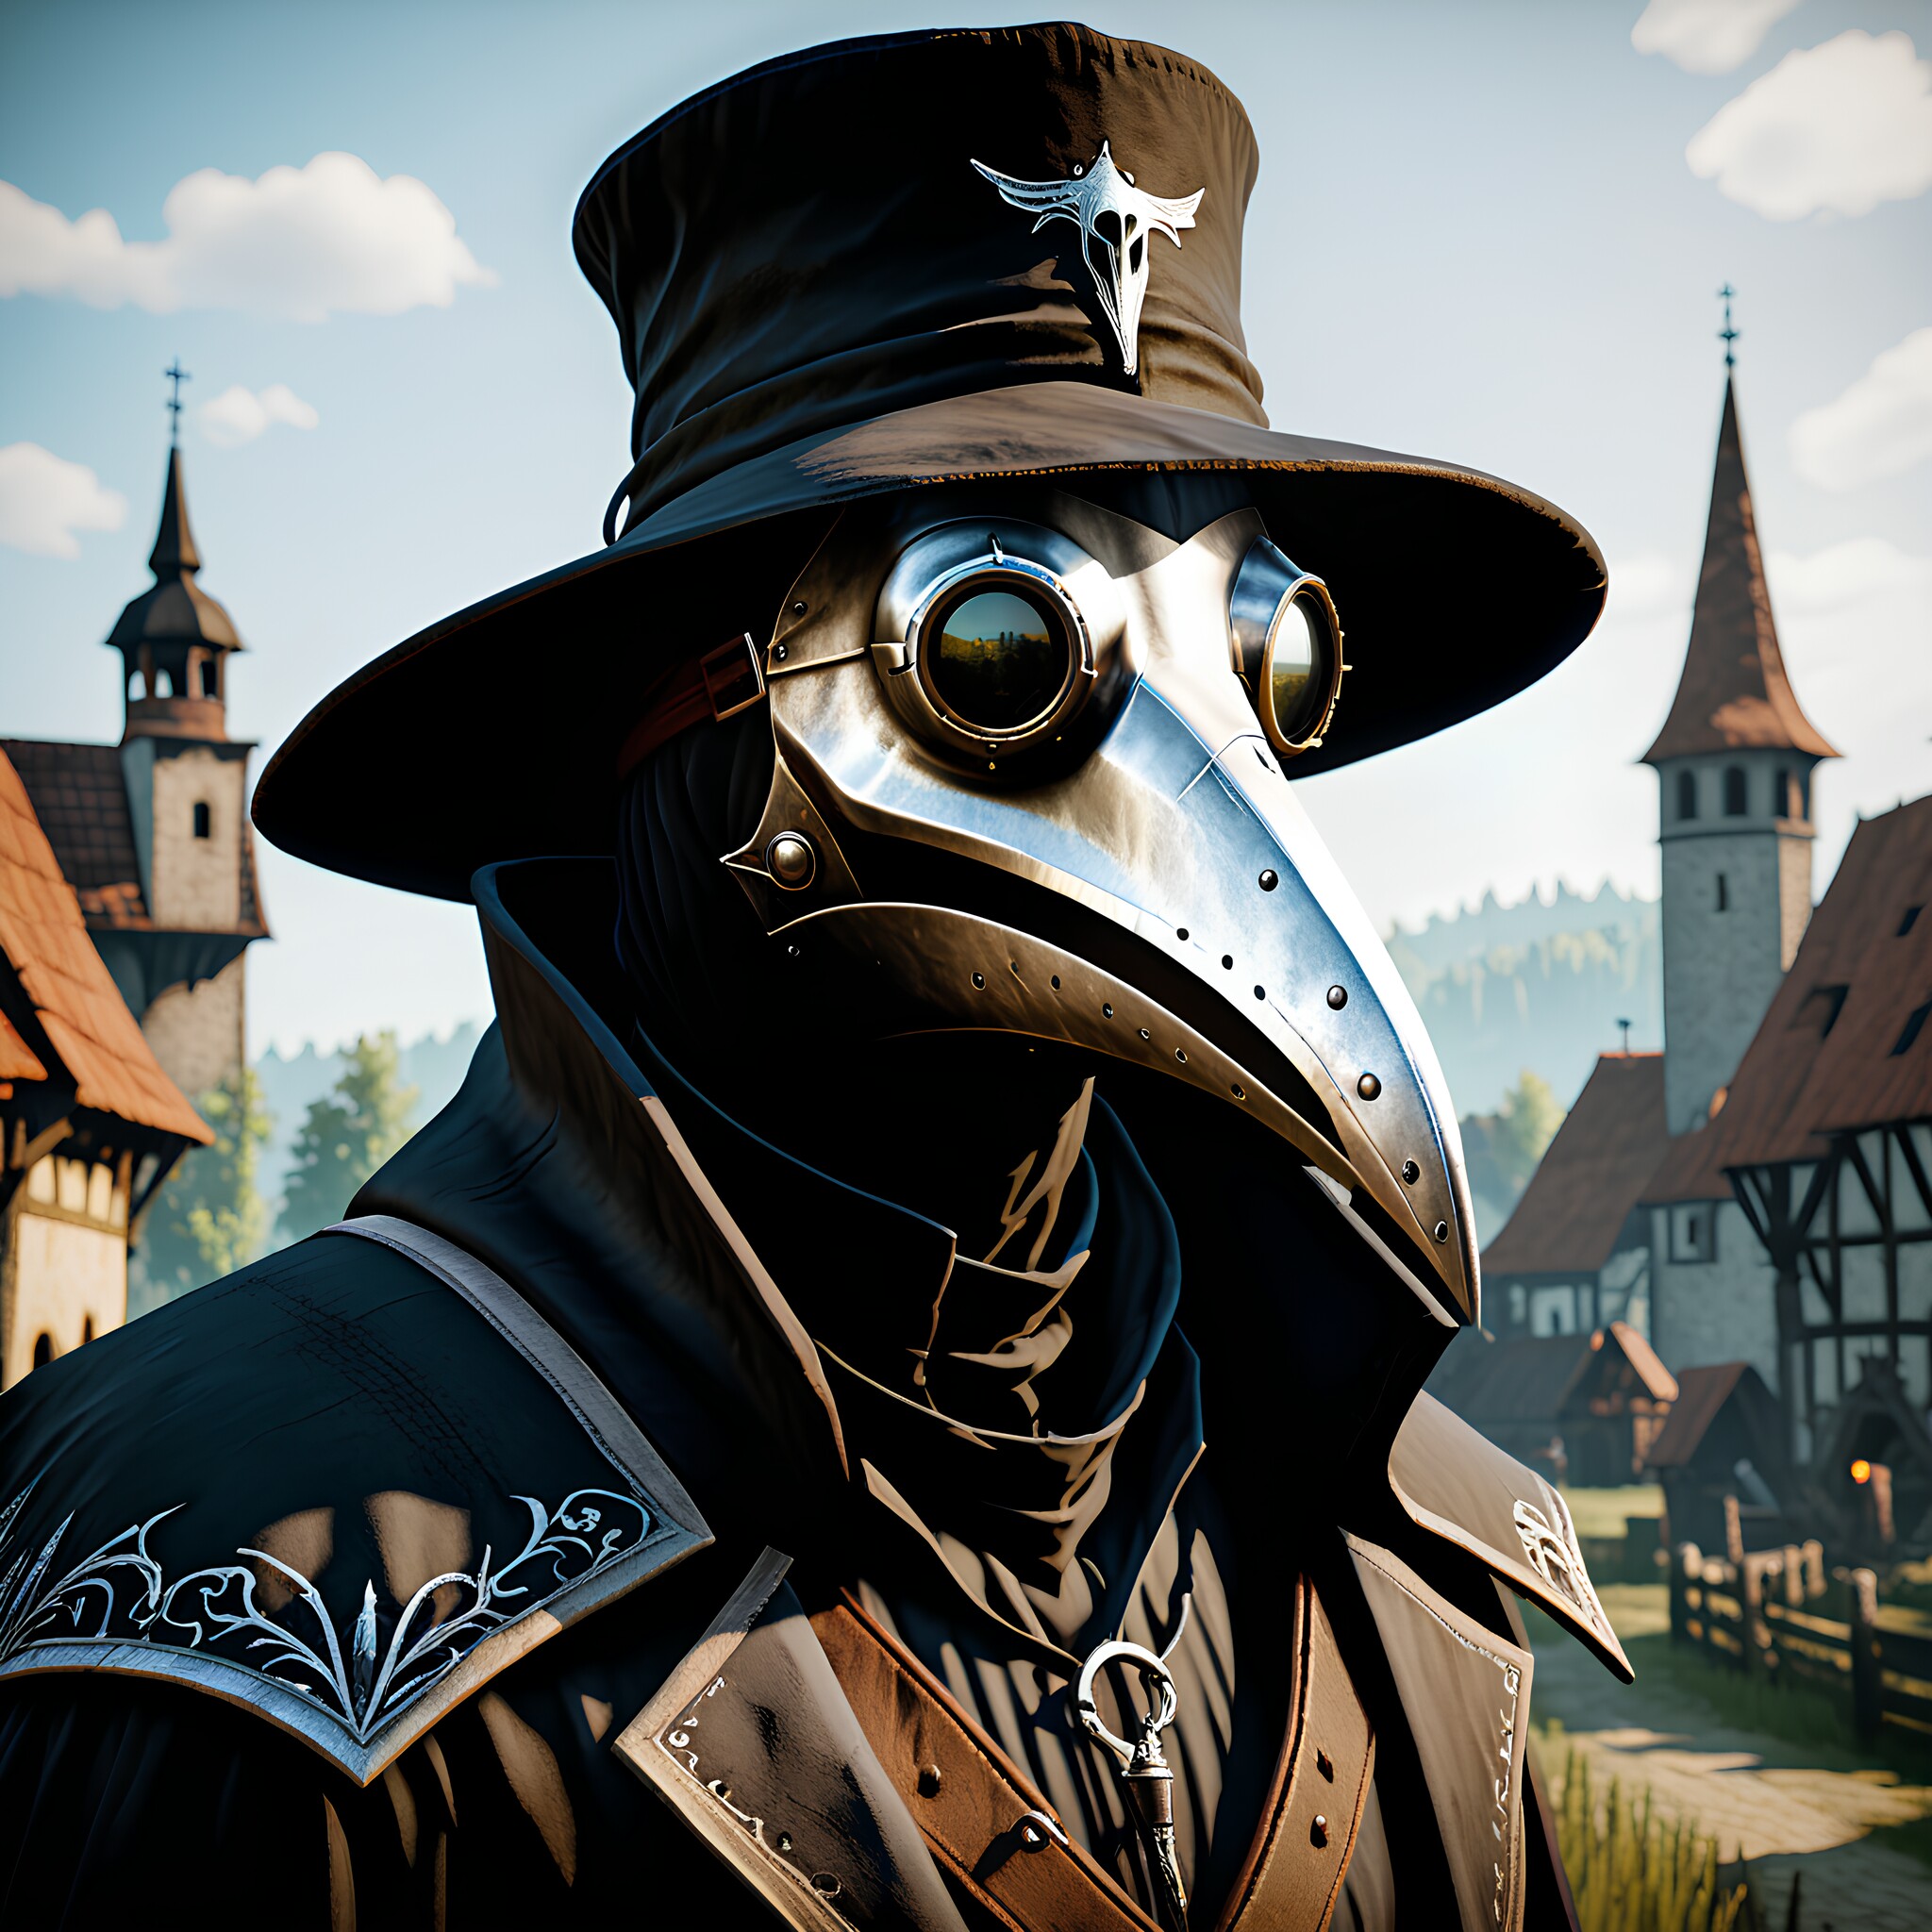 The plague doctor